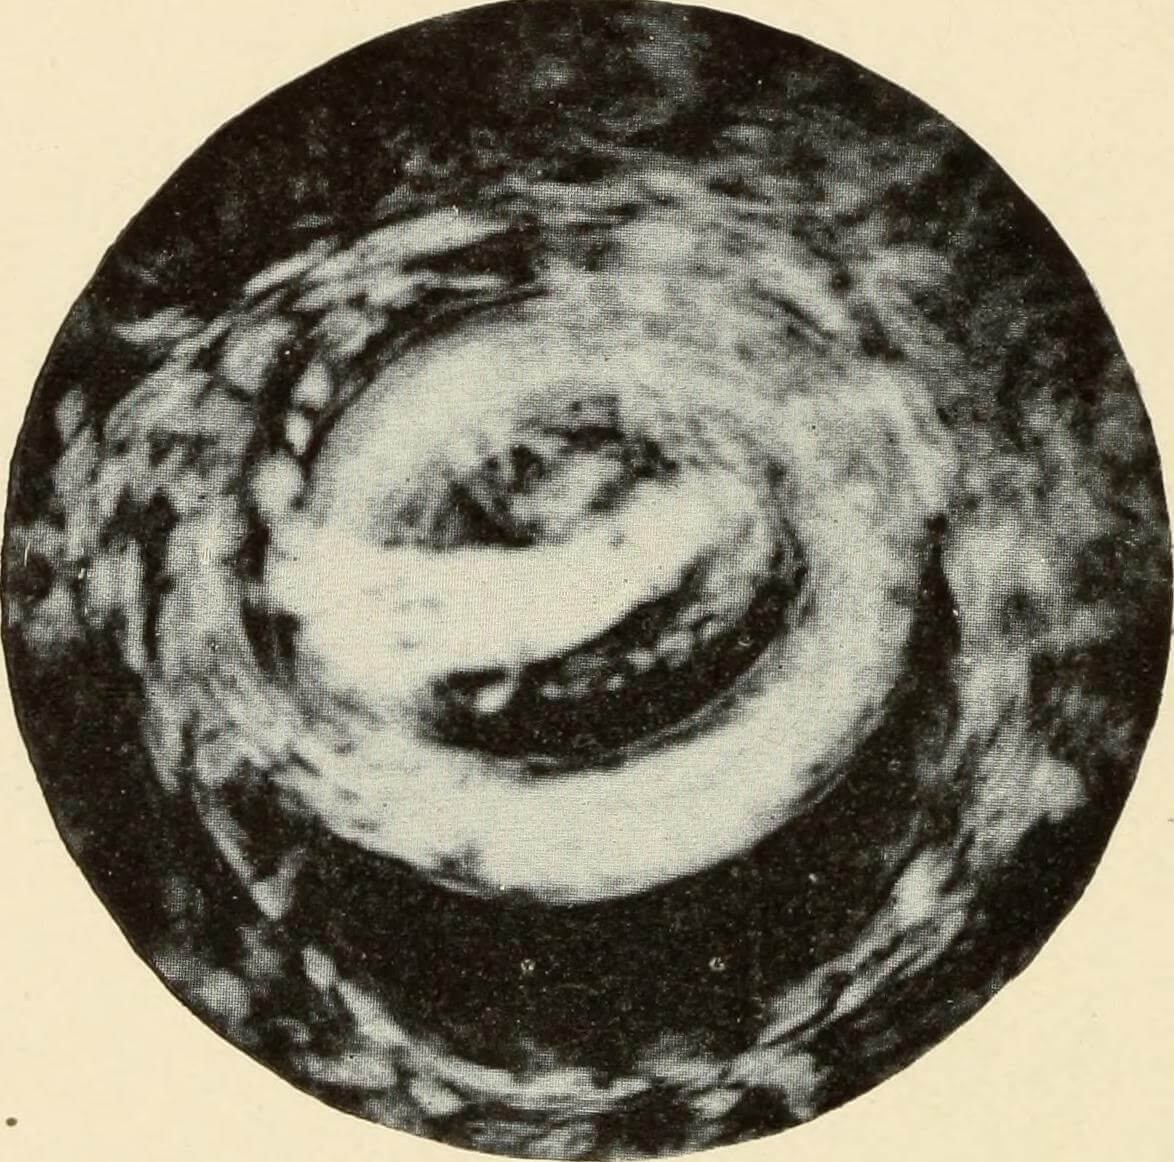 The Activity of the Larva of Nectoramericanus, Puerto Rico, 1911. Originally published in Bailey K. Ashford and Pedro Guitérrez Igaravidez's Uncinariasis (Hookworm disease) in Porto Rico: a medical and economic problem (Washington DC: US Government Print Office, 1911), 159. Photograph uploaded by Flickr user Internet Archive Book Images. Image is in public domain.